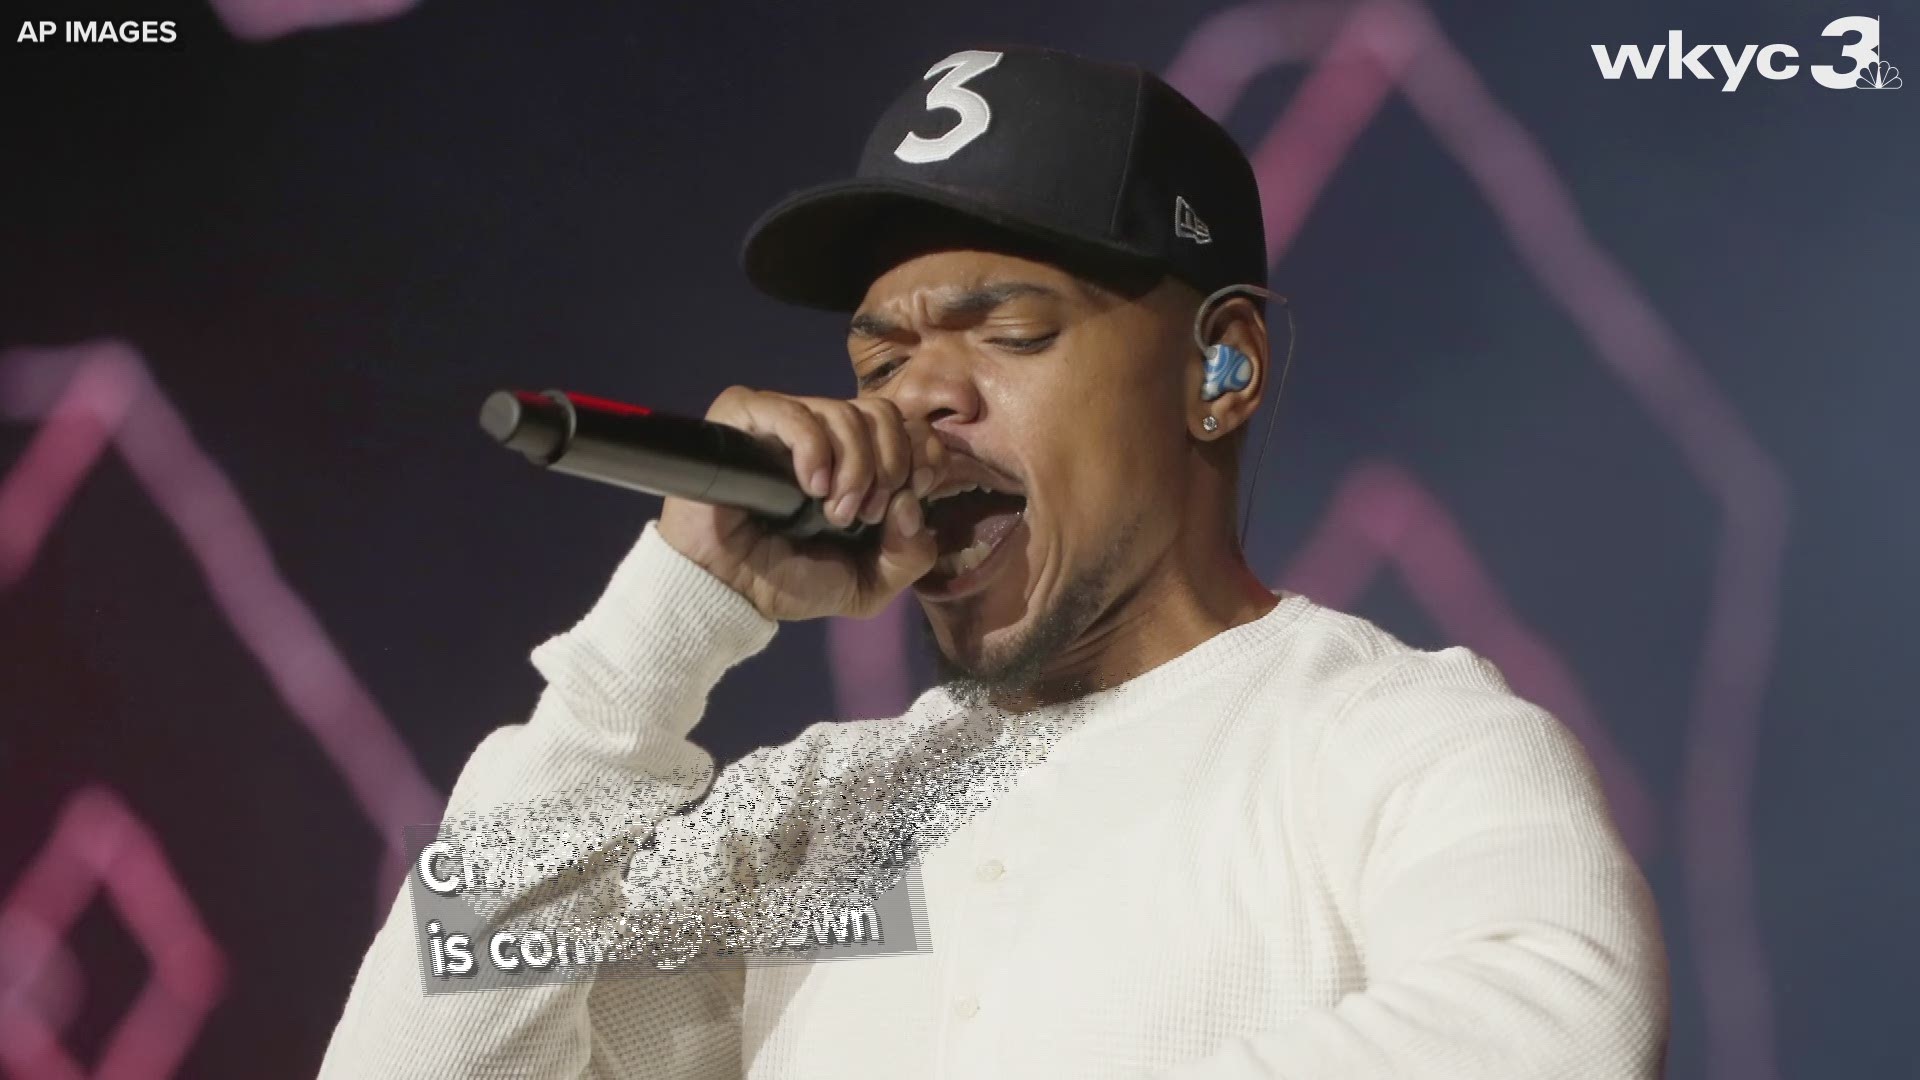 Love Chance the Rapper? You'll have 'no problem' this fall.